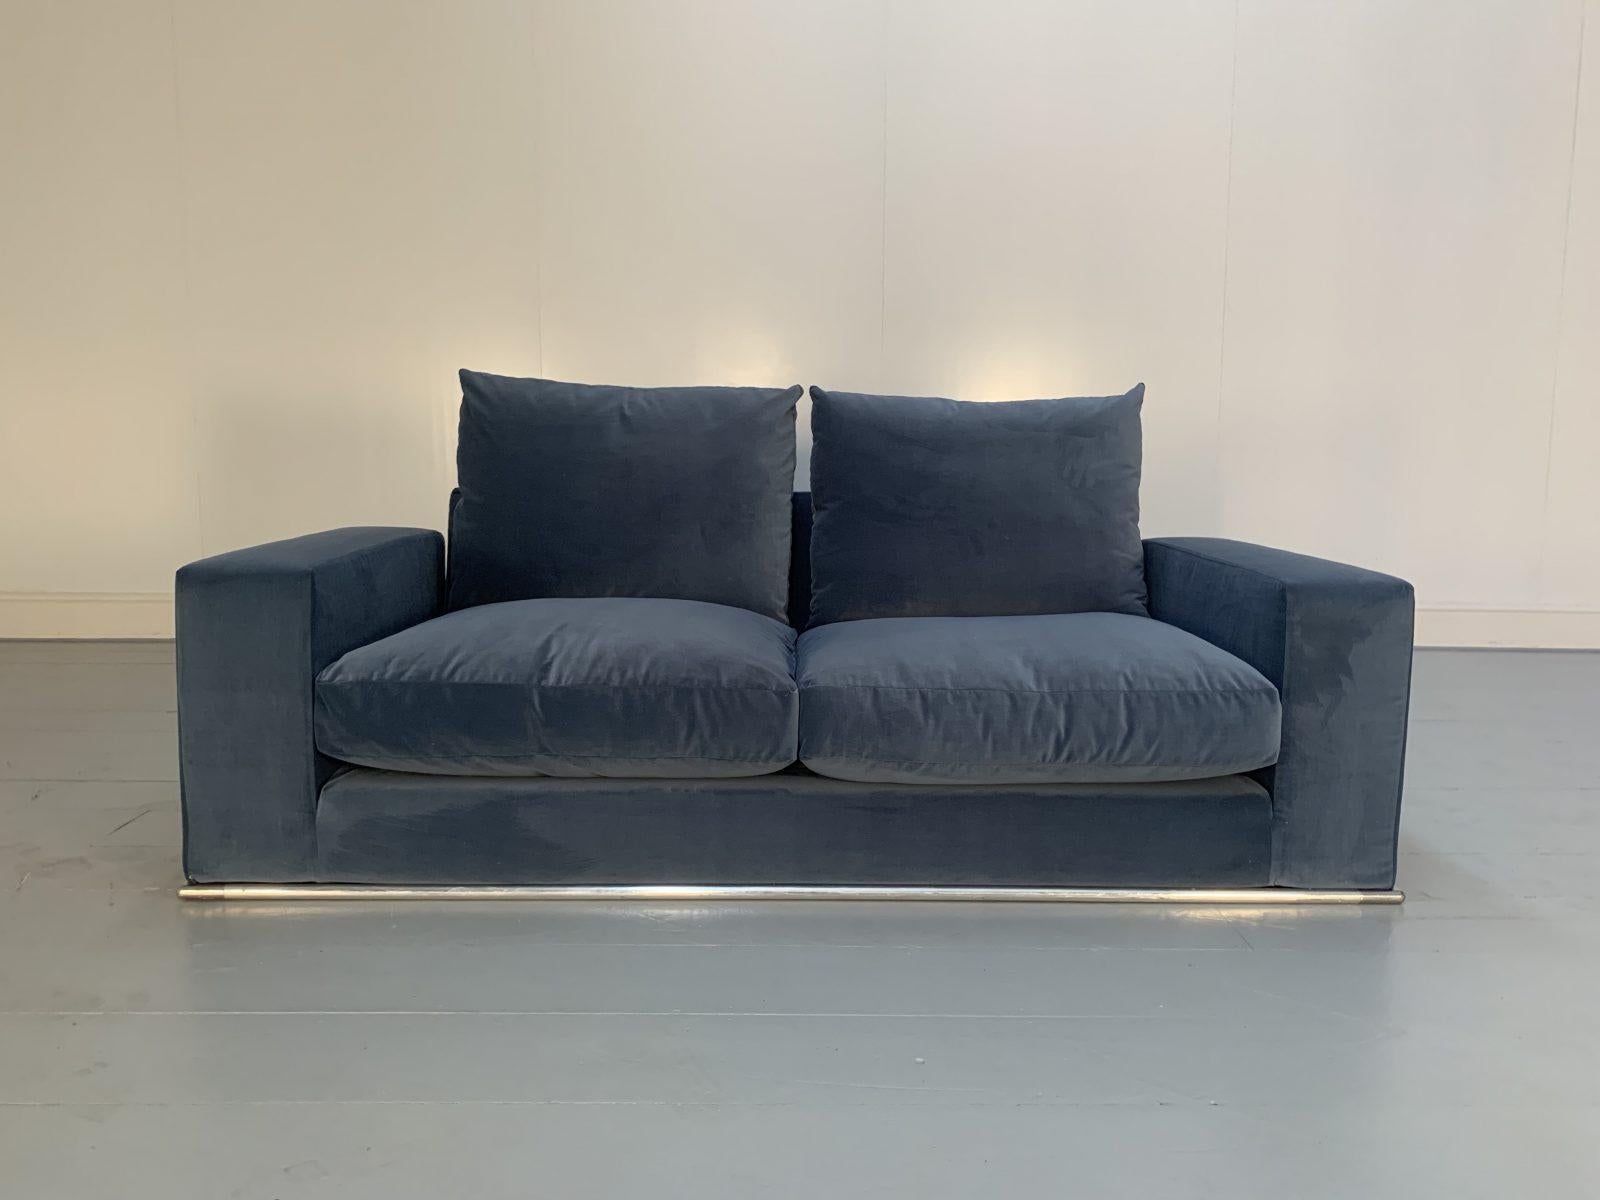 This is superb, immaculately-presented example of large-scale seating, it being a “Marcel” Large 2.5-Seat Sofa dressed in the most-luxurious, short-pile, soft-velvet in mid-blue, from the “Maxalto” Range of seating by the world renown Italian